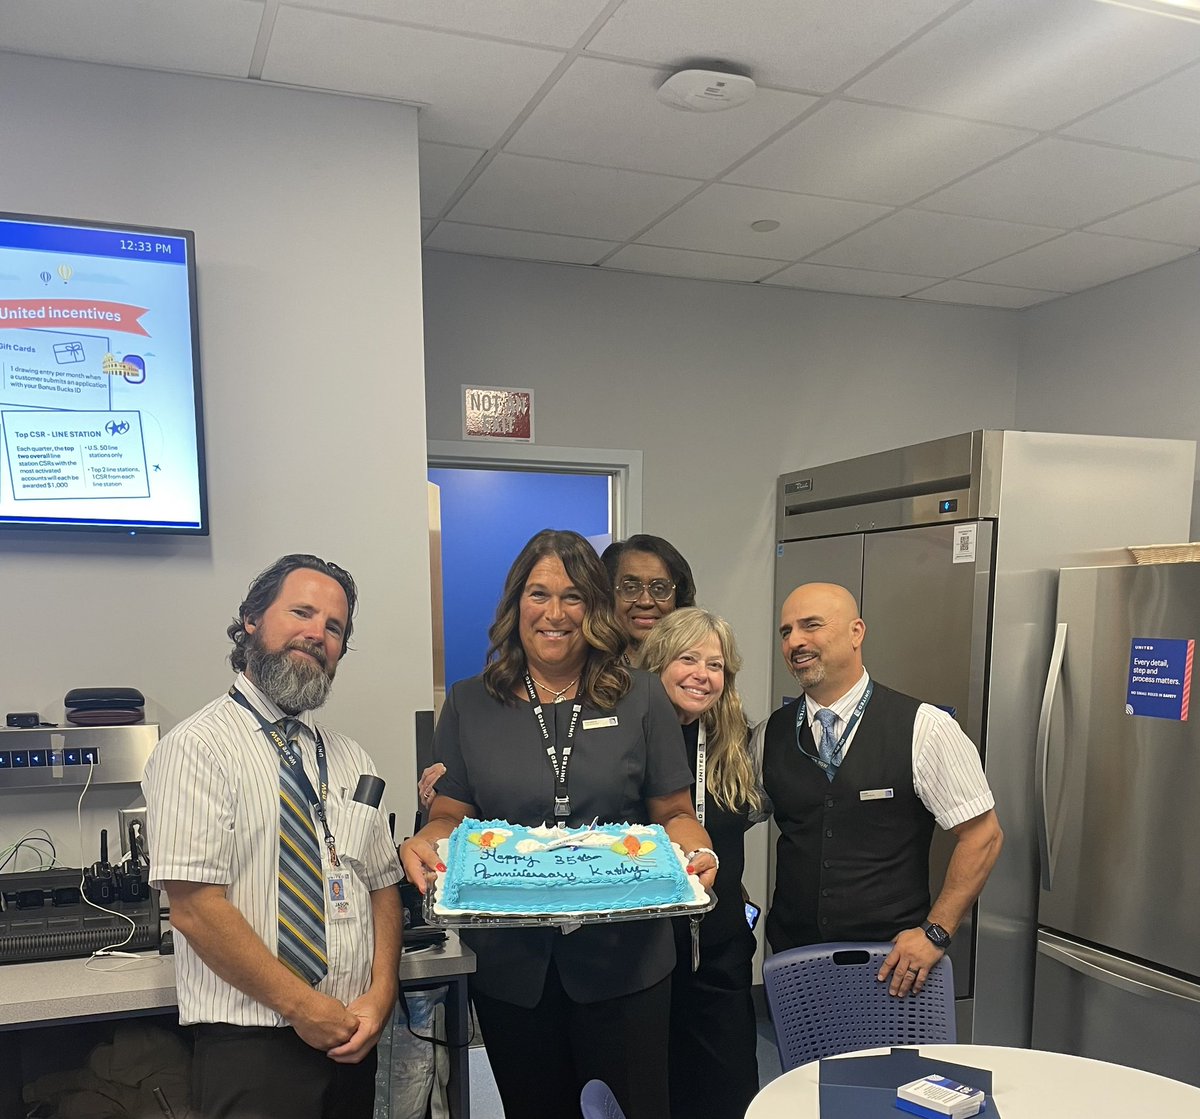 Fort Myers very own Kathy Duvall and Anna Cristiano celebrating milestone Anniversaries with United Airlines - Congratulations! @weareunited @RSWAirport @united #beingunited @scarnes1978 @LouFarinaccio @MikeSpagnuoloUA @jacquikey @DJKinzelman